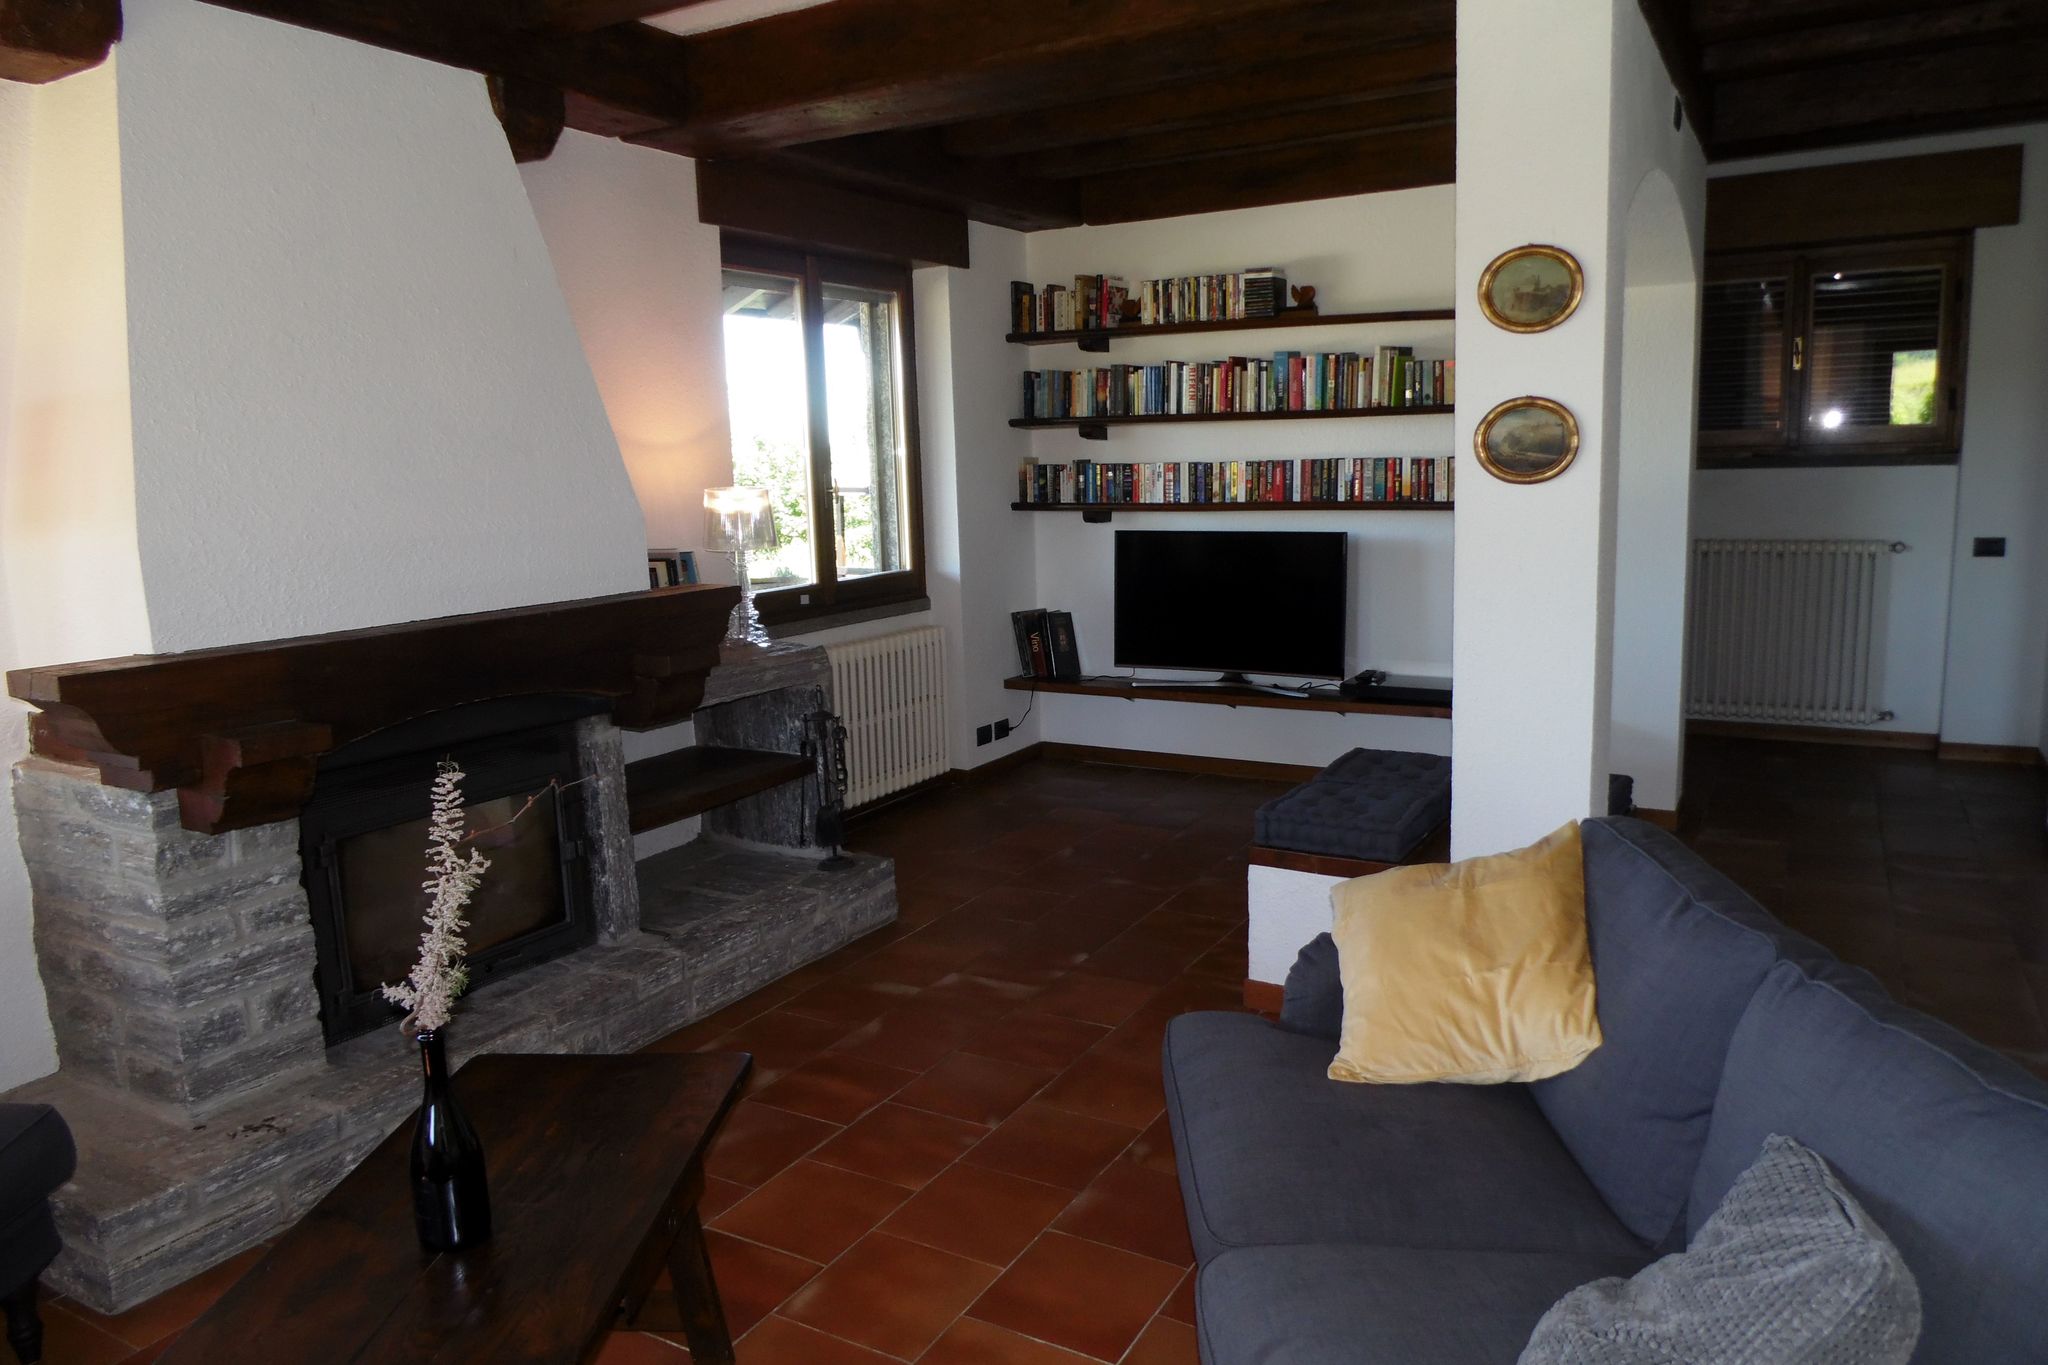 Detached villa with pool within a farm ground, in quiet hillside